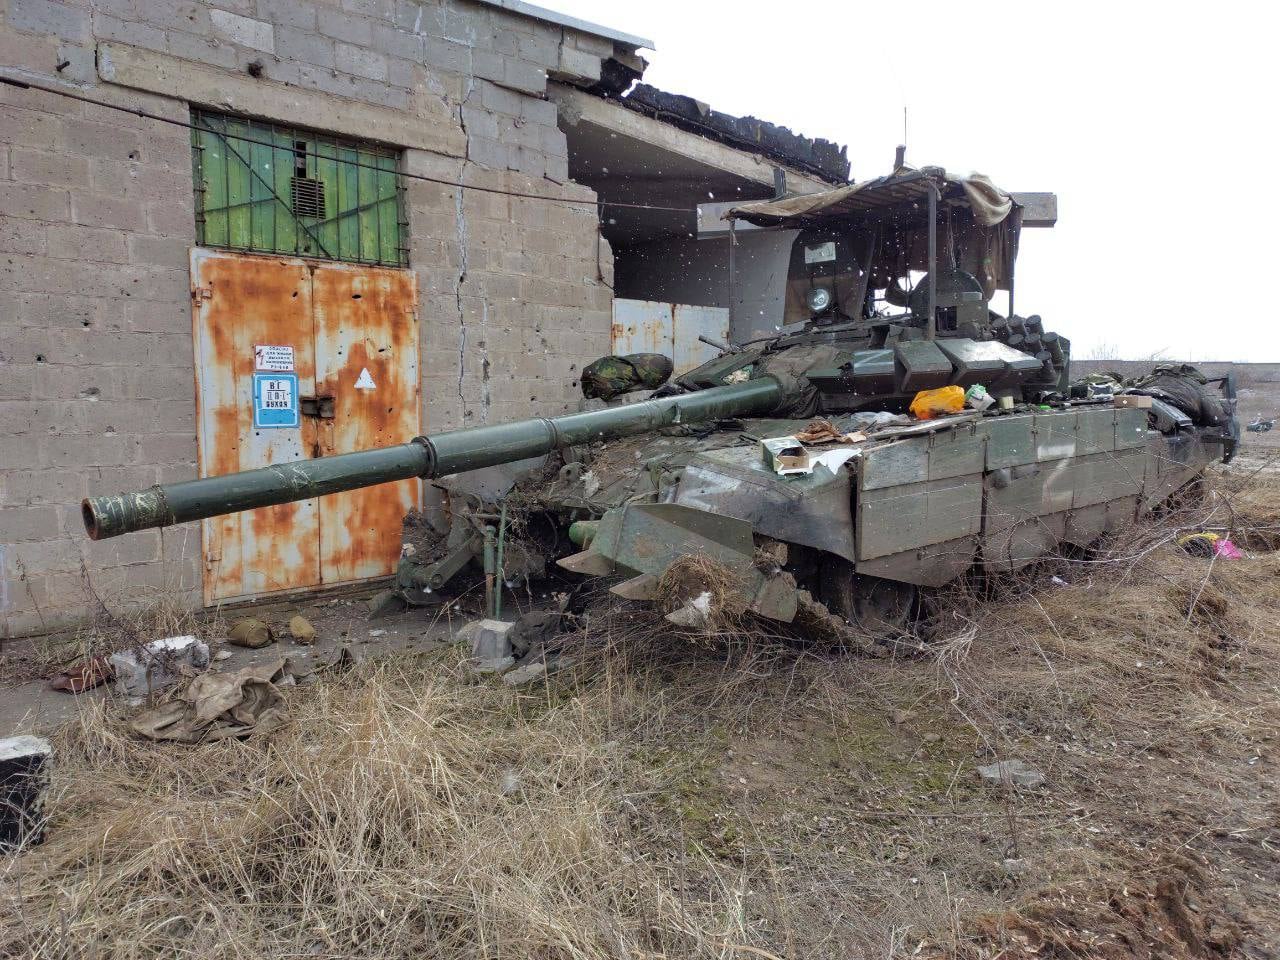 Destroyed enemy tank on the outskirts of Mariupol, open source image